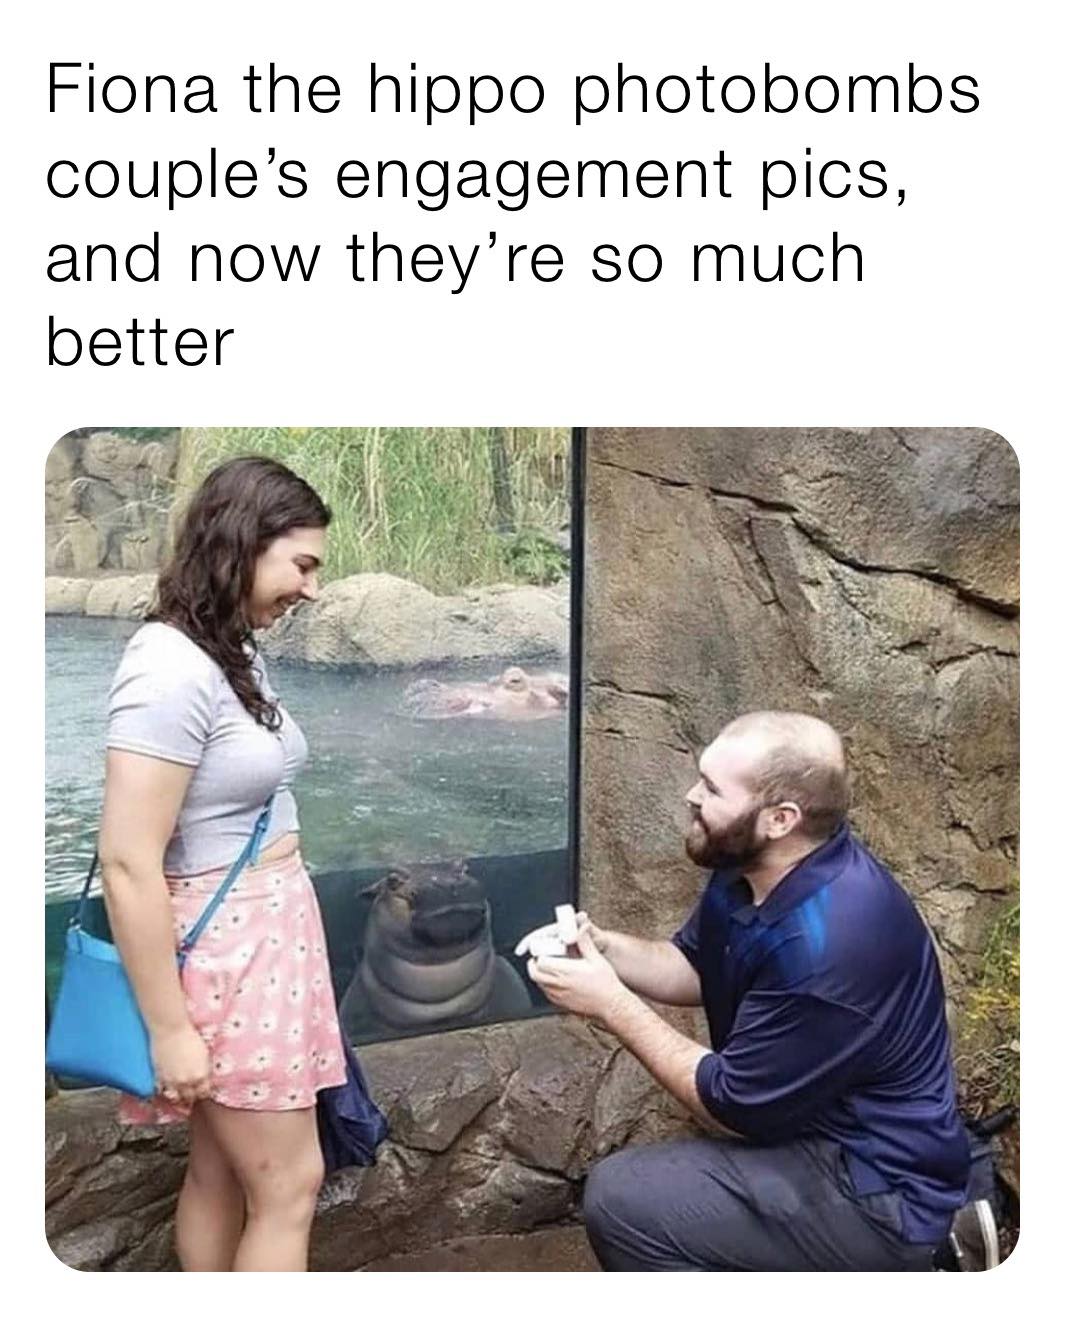 fiona the hippo proposal - Fiona the hippo photobombs couple's engagement pics, and now they're so much better